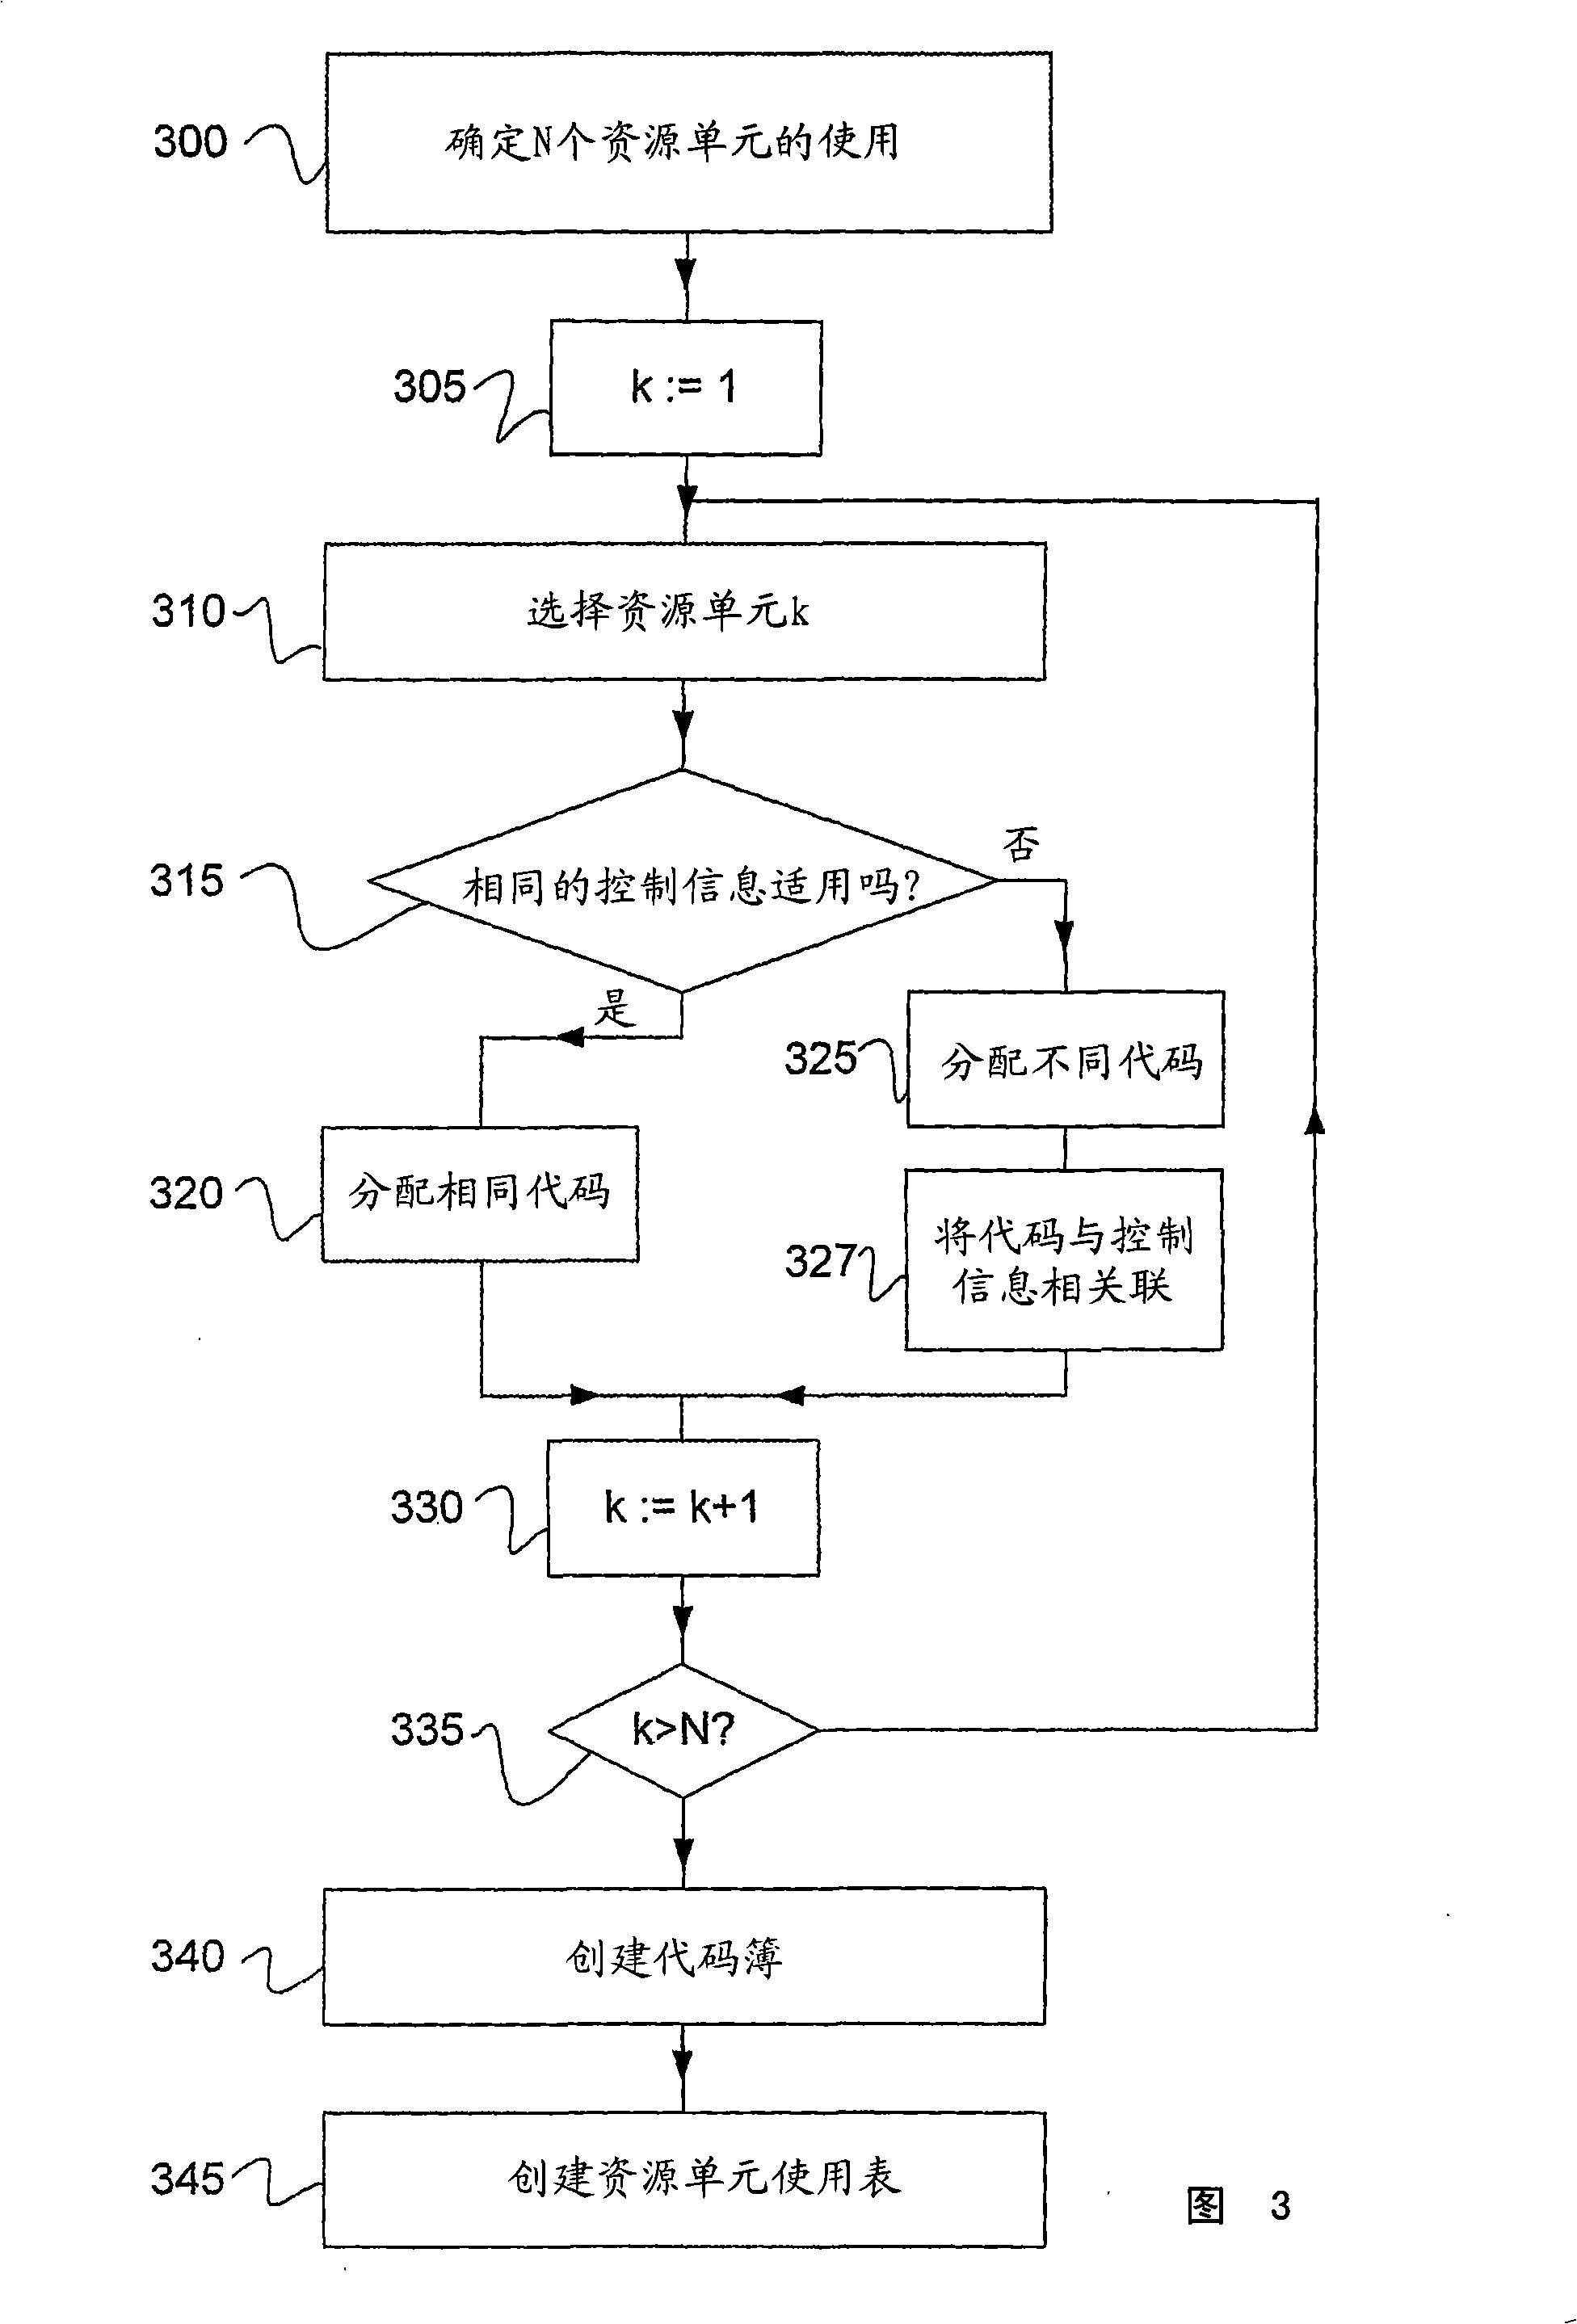 Method and device for transmitting control information in communication network